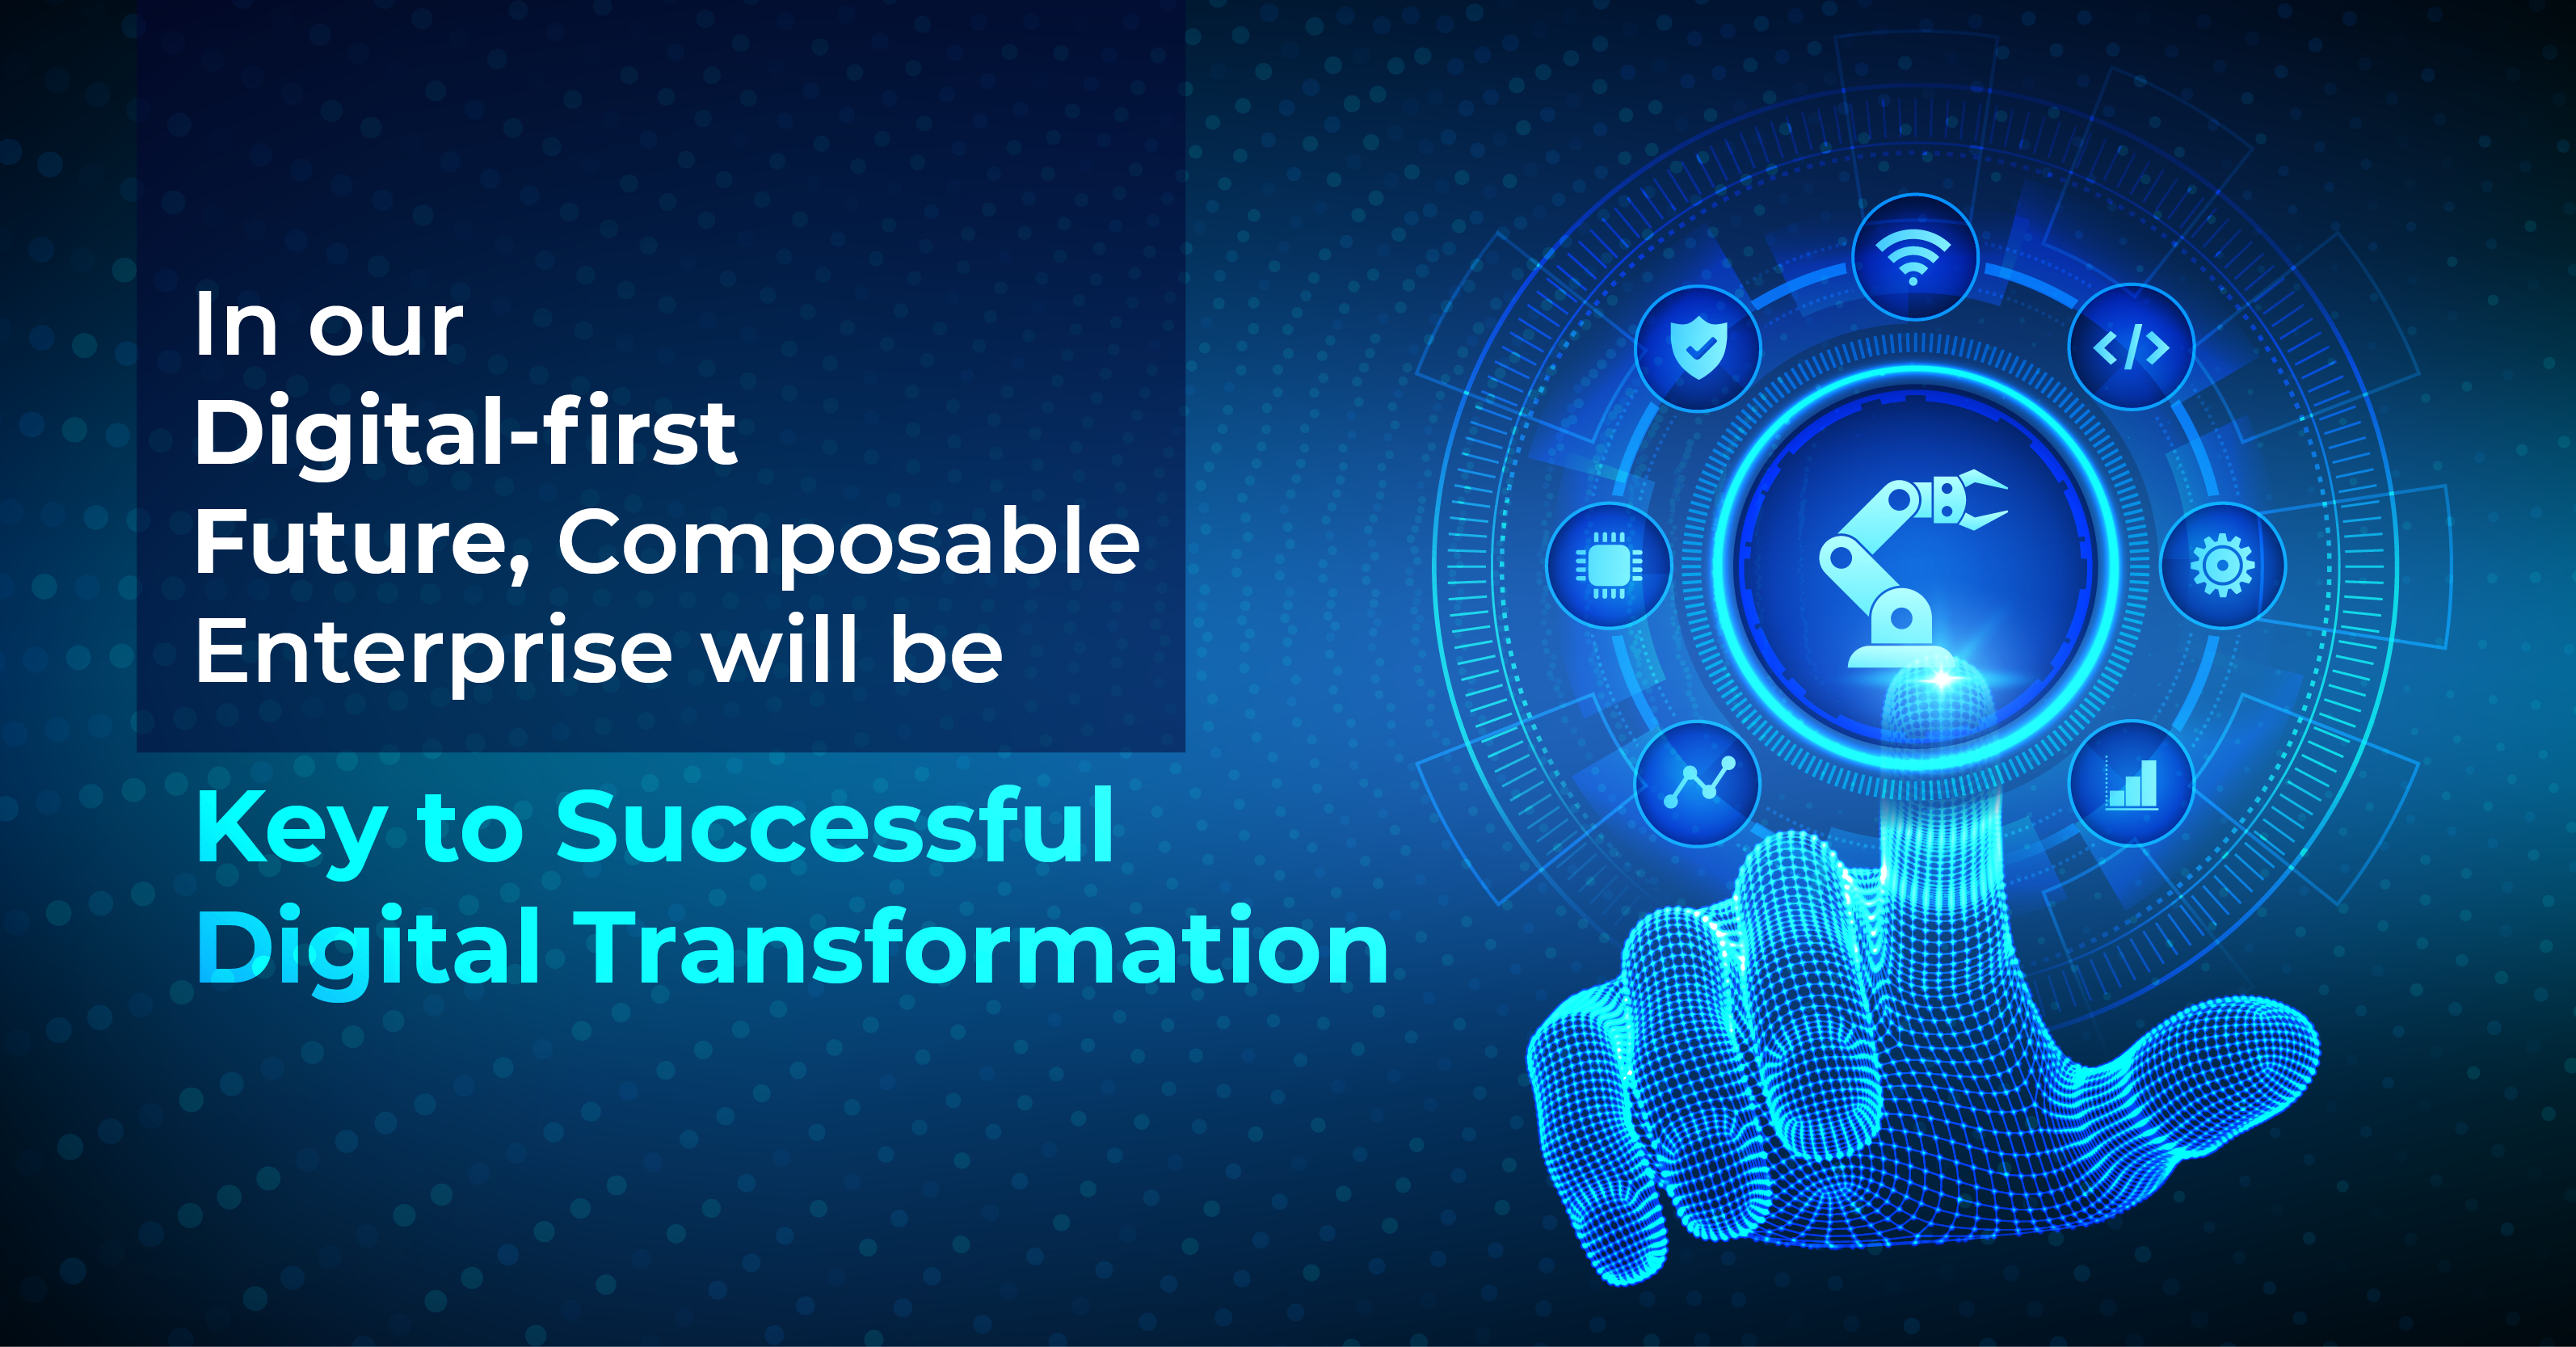 In our Digital-first Future, Composable Enterprise will be Key to Successful Digital Transformation